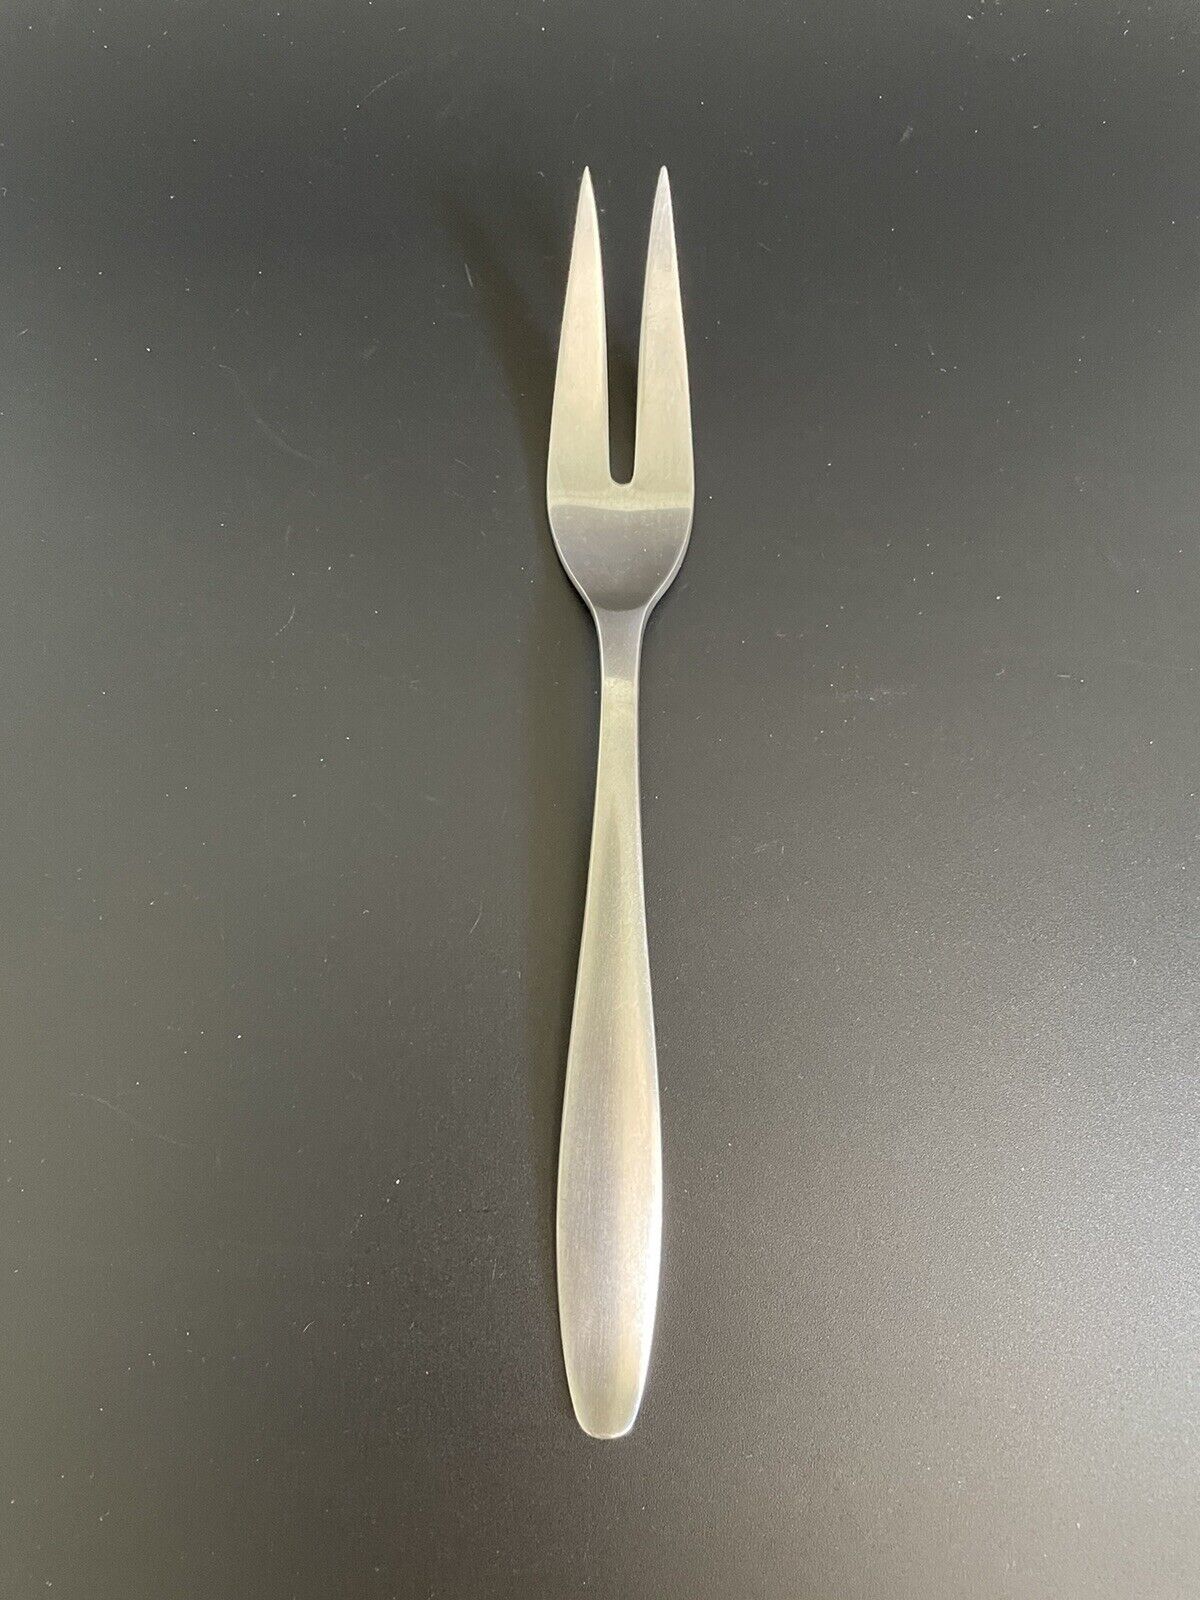 Gorham Silver Stegor Stainless Pace 8½" Cold Meat Serving Fork Replacement - $19.95